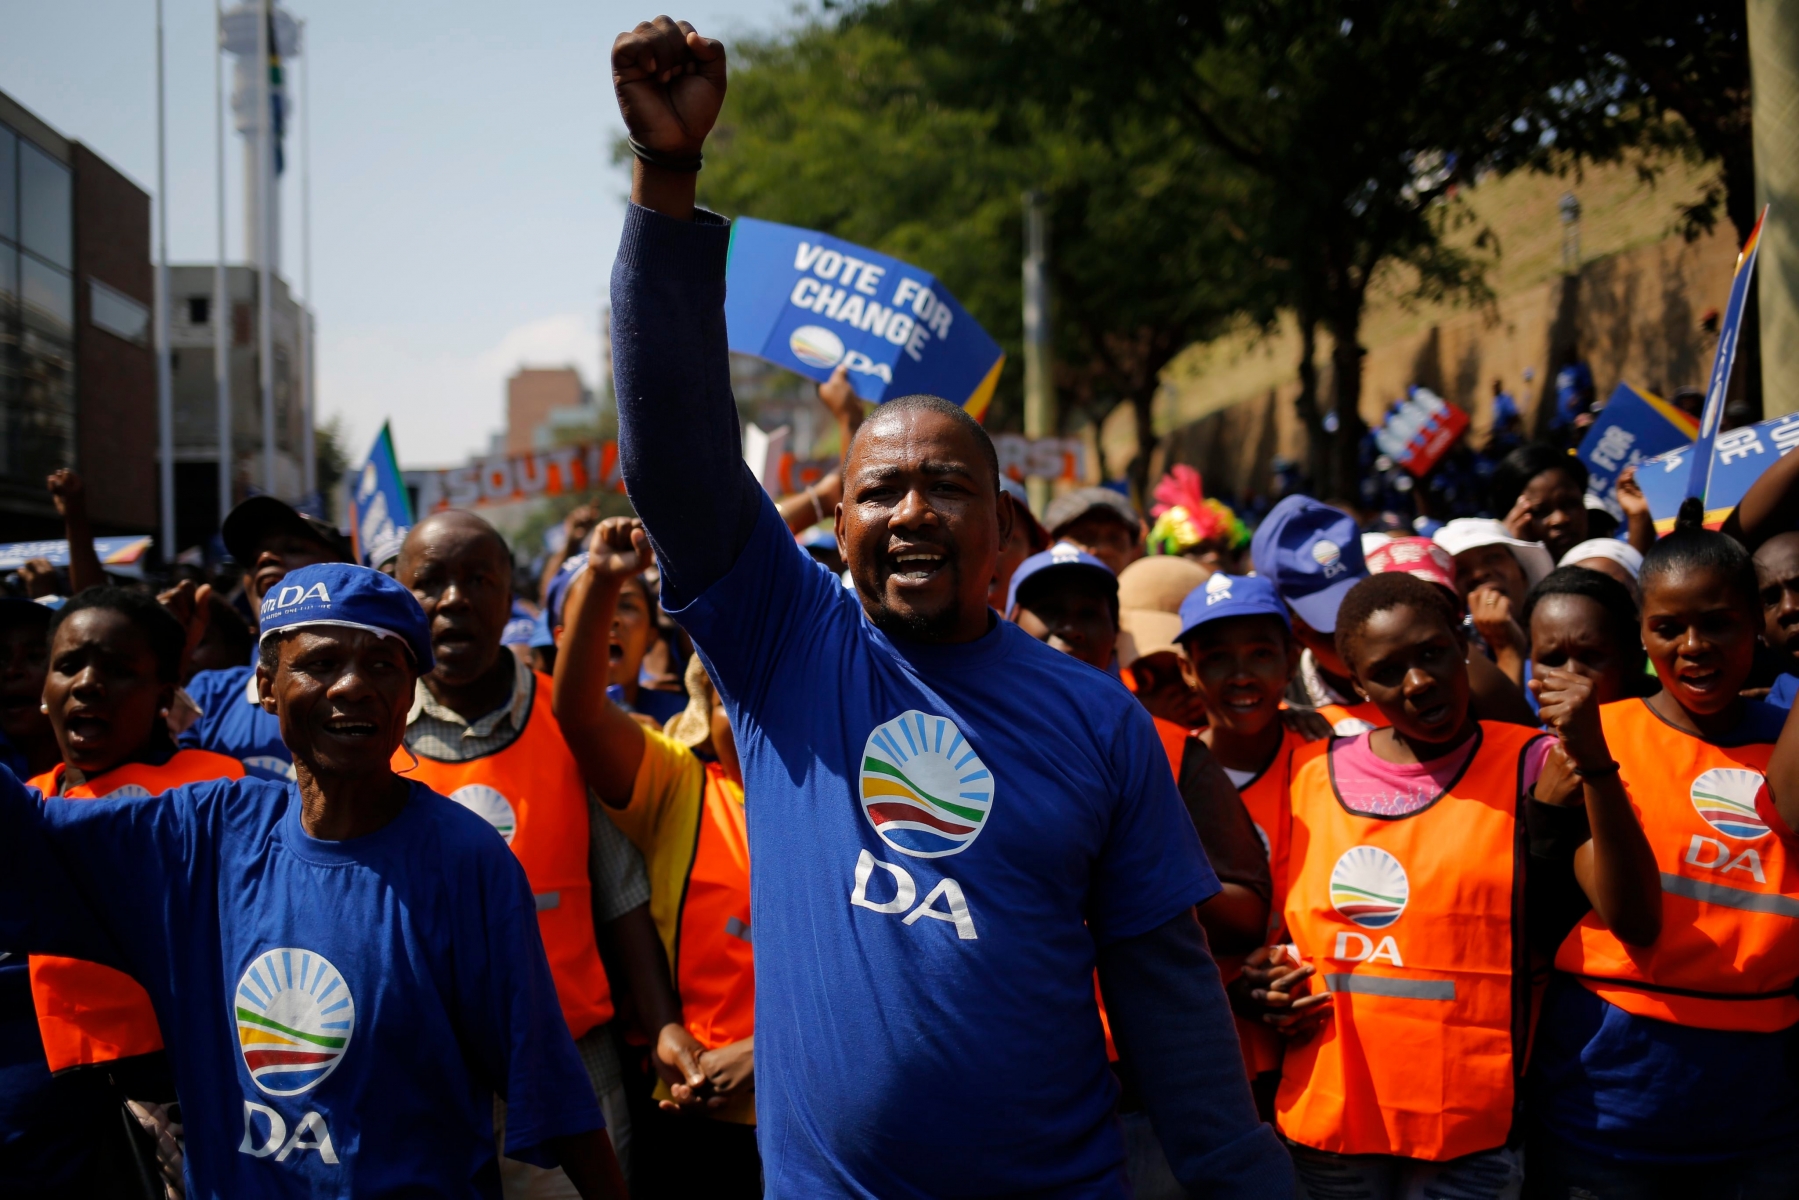 epa05456100 A picture made available on 05 August 2016 shows some of the thousands of Democratic Alliance (DA) members march through the streets of downtown Johannesburg during a protest march against South African President, Jacob Zuma, Johannesburg, South Africa,15 April 2016.  The party has made a historic victory by winning the Nelson Mandela Bay area from the ruling African National Congress (ANC) and as results come in from the recent local election may win more major cities in South Africa. The ANC has ruled the country since 1994.  EPA/KIM LUDBROOK SOUTH AFRICA ELECTIONS